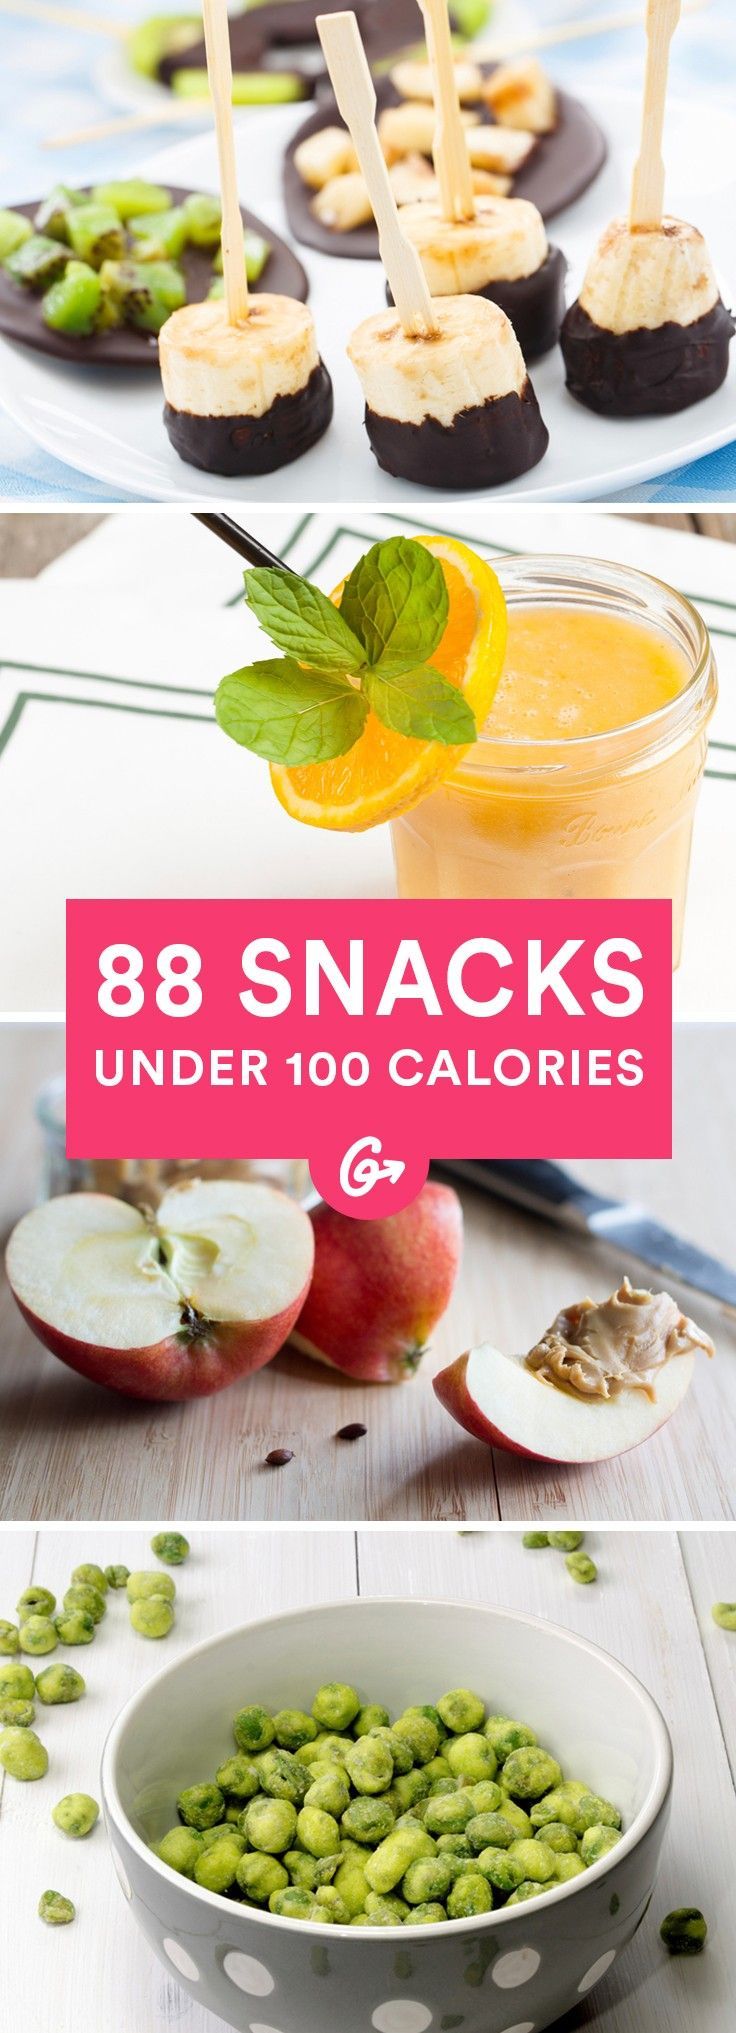 88 Low-Calorie Snacks That Fill You Up -   20 diet snacks under 100 calories
 ideas